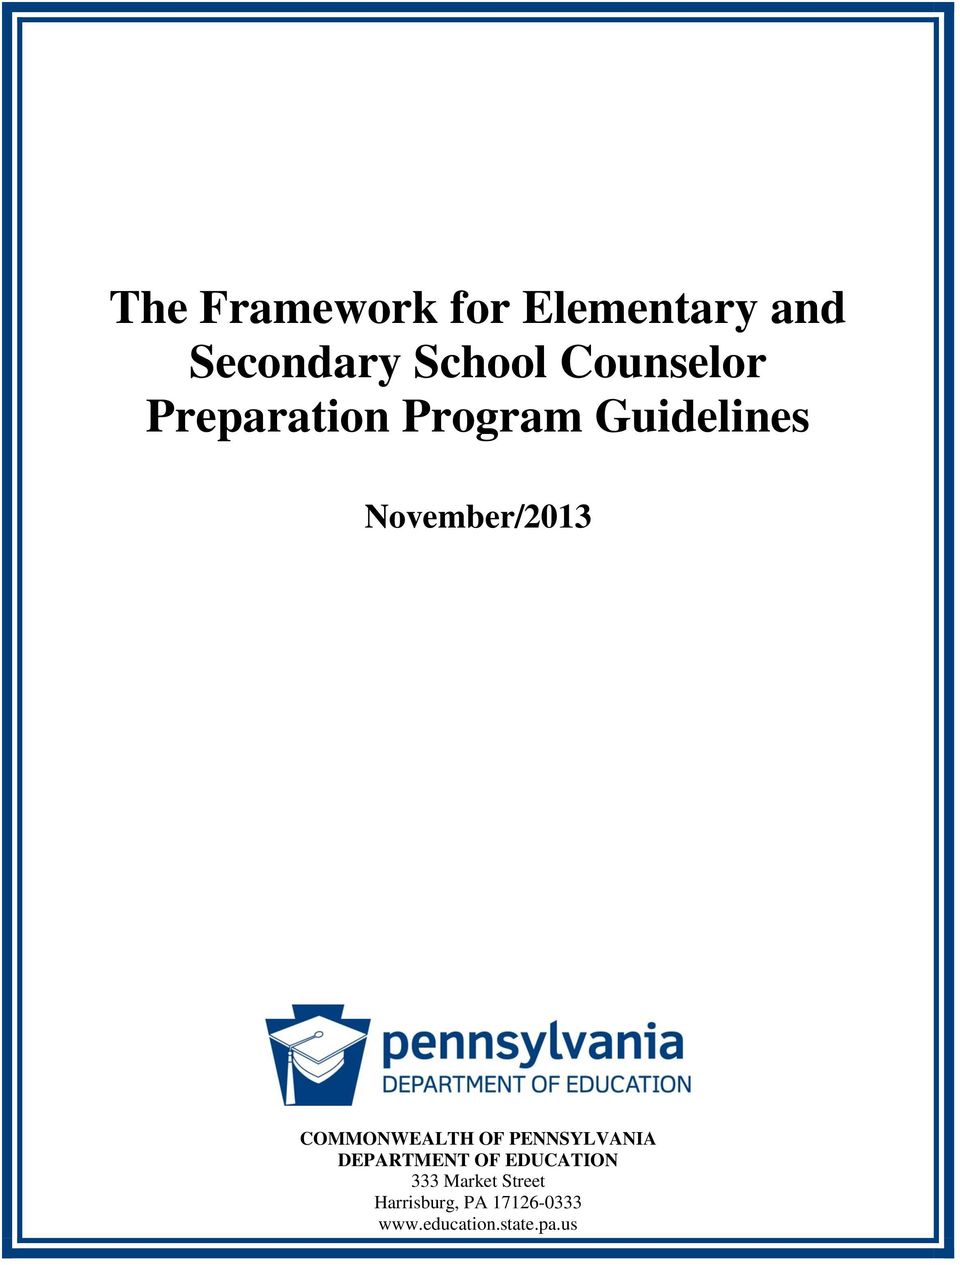 COMMONWEALTH OF PENNSYLVANIA DEPARTMENT OF EDUCATION 333